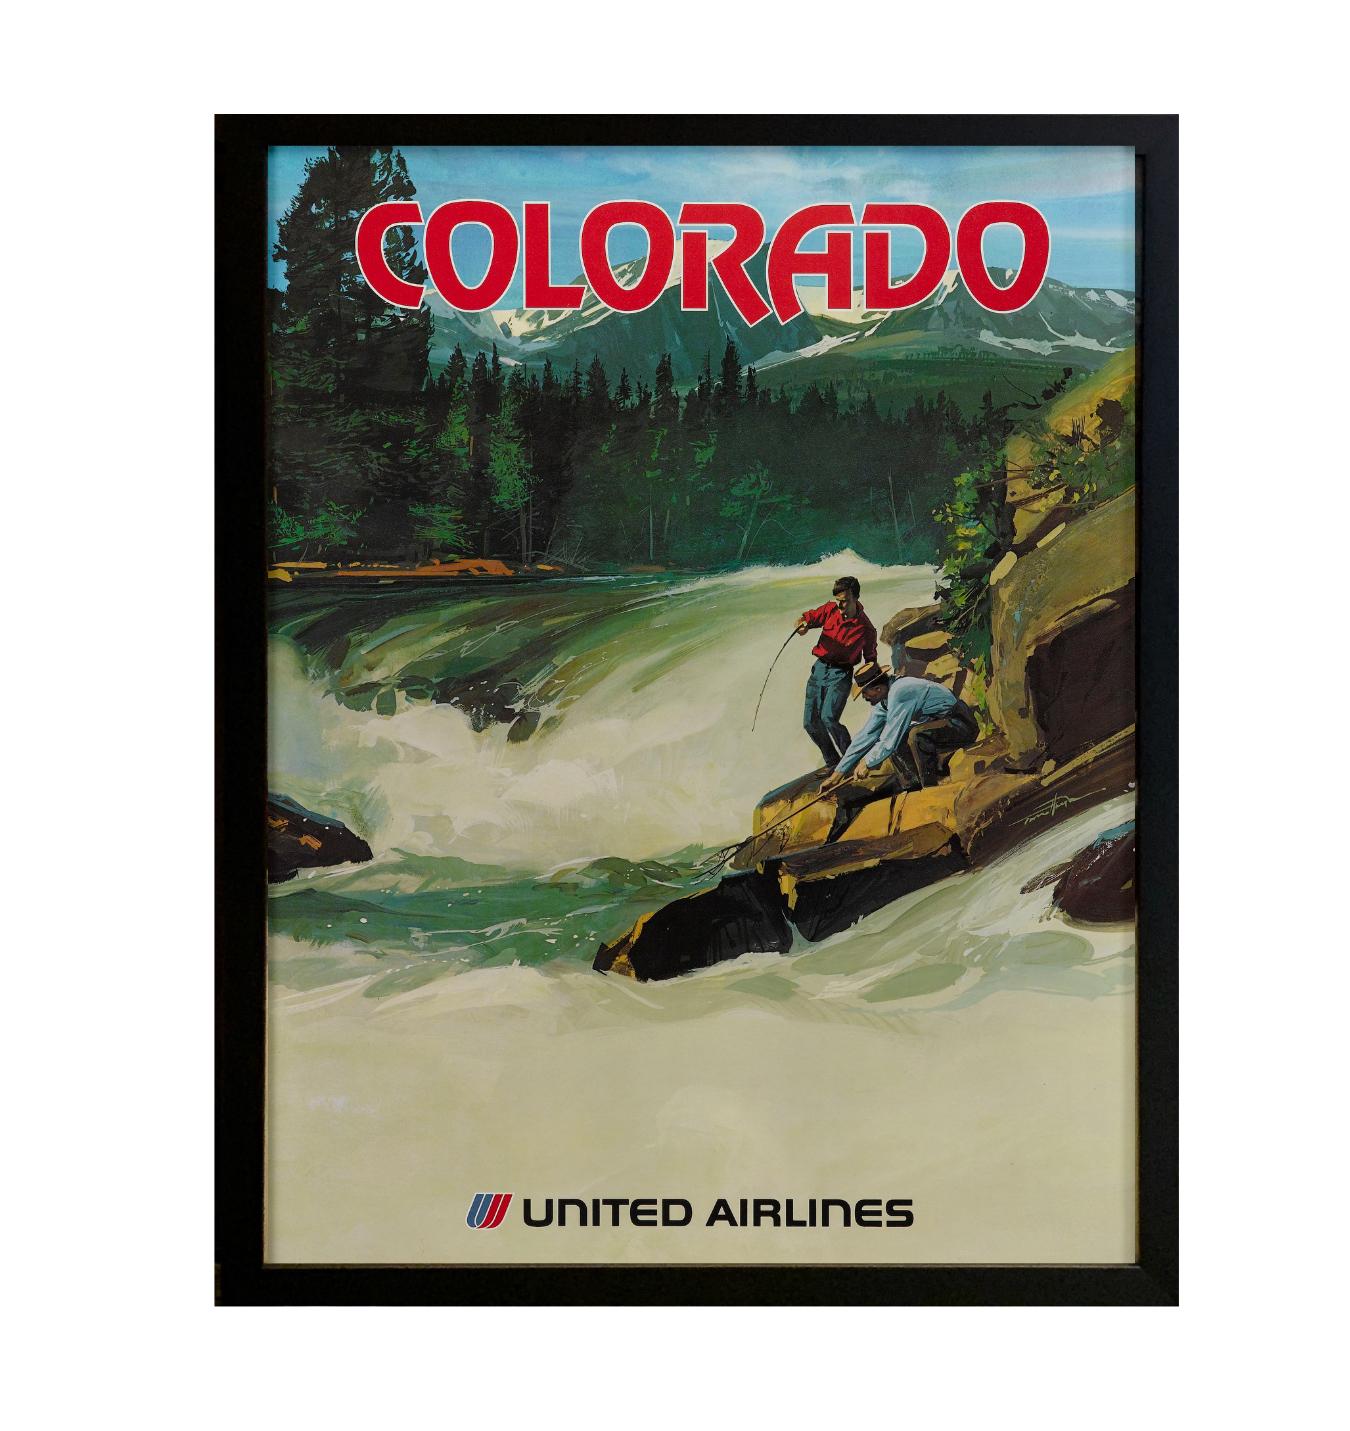 Offered is a vintage travel poster for United Airlines from the 1970s. This advertisement poster shows Colorado as one of United Airlines' alluring travel destinations. The design features two men fishing along a rushing river, surrounded by